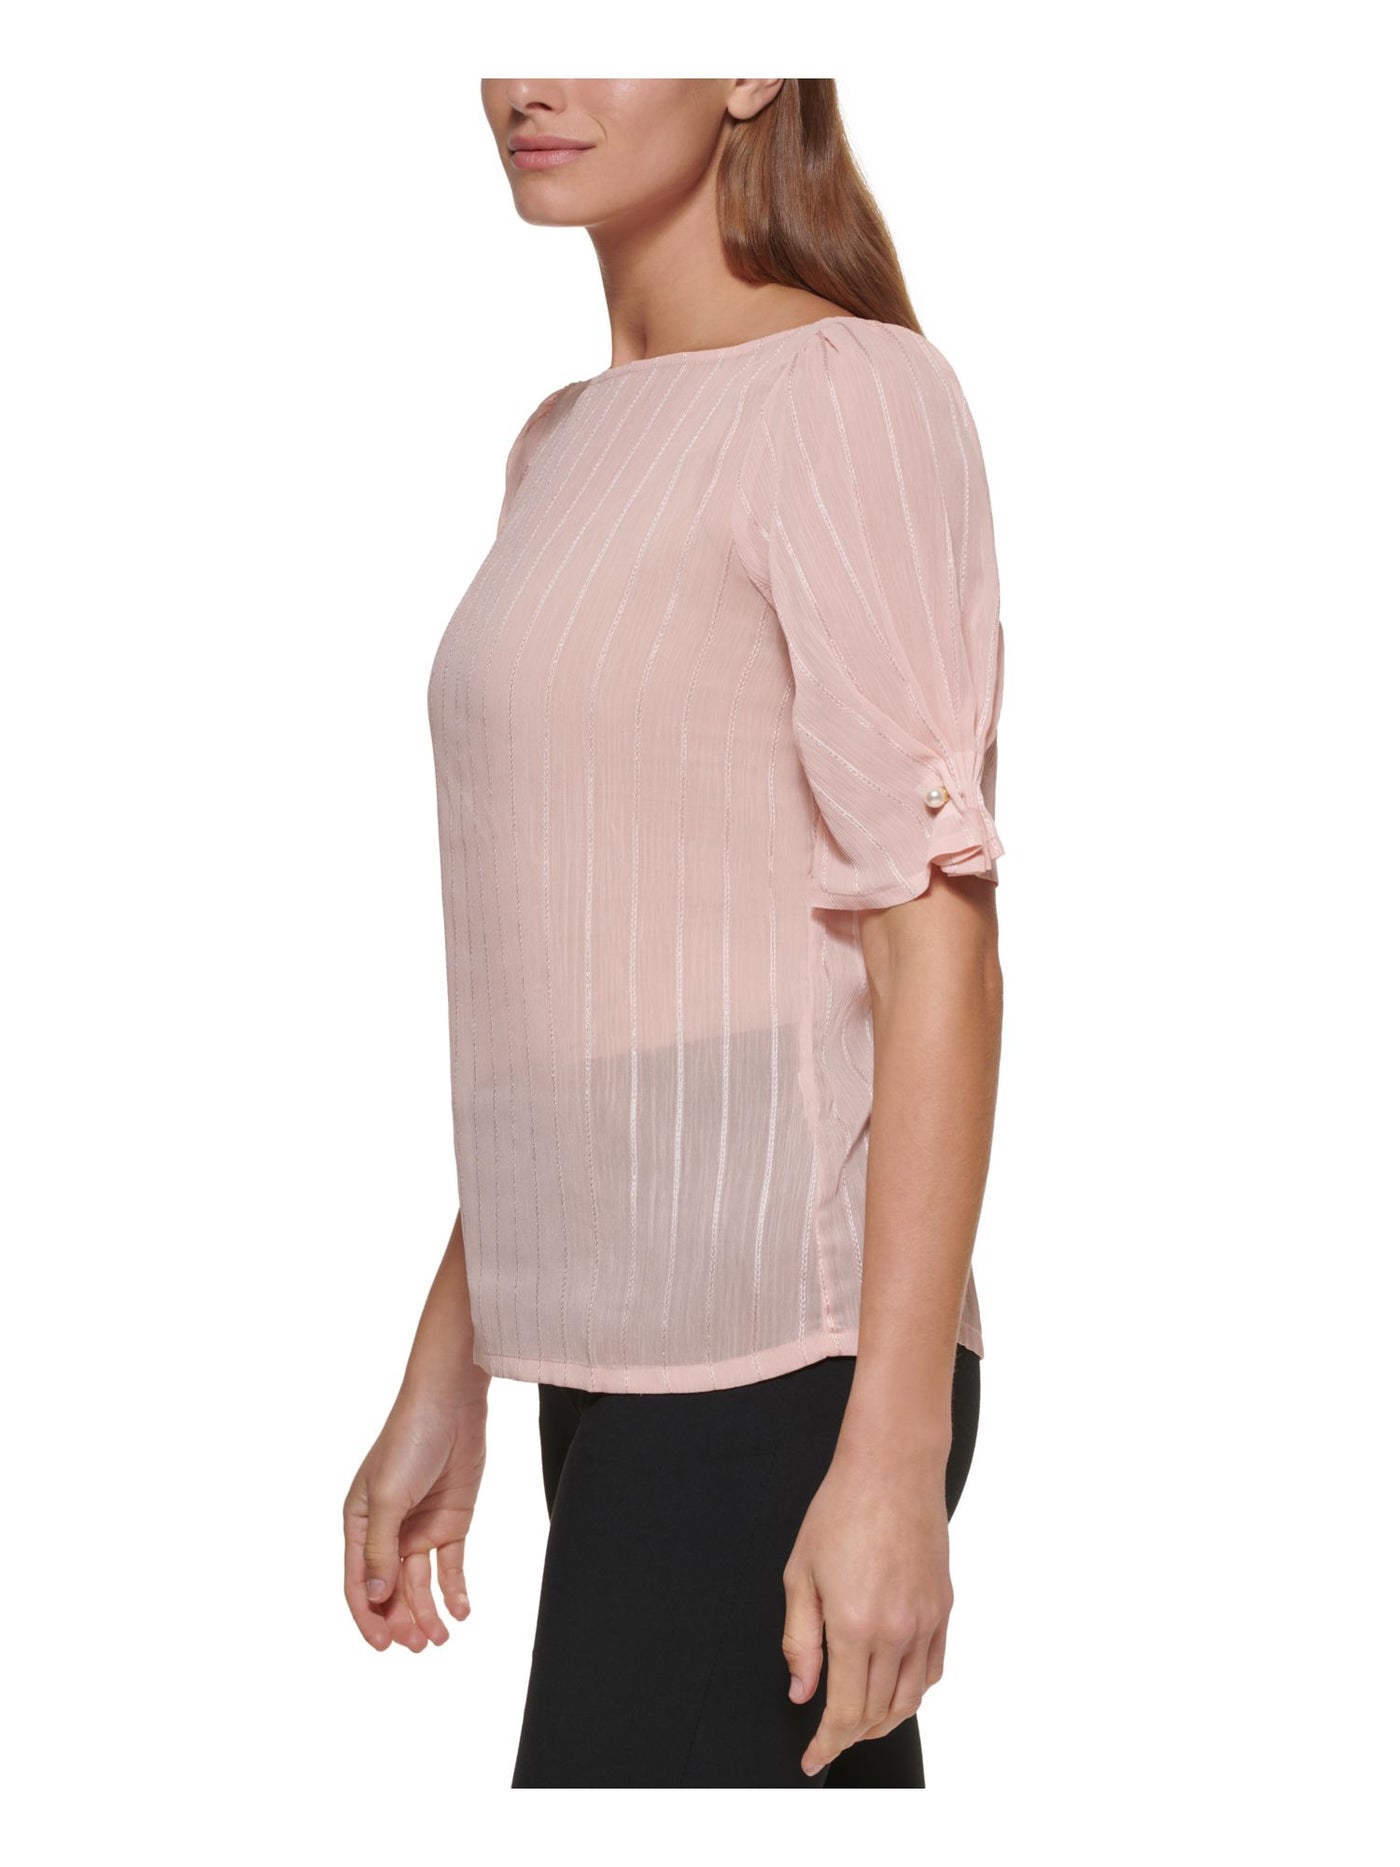 DKNY Womens Pink Pleated Sheer Pullover Pearl Button Cuffs Elbow Sleeve Crew Neck Wear To Work Top L